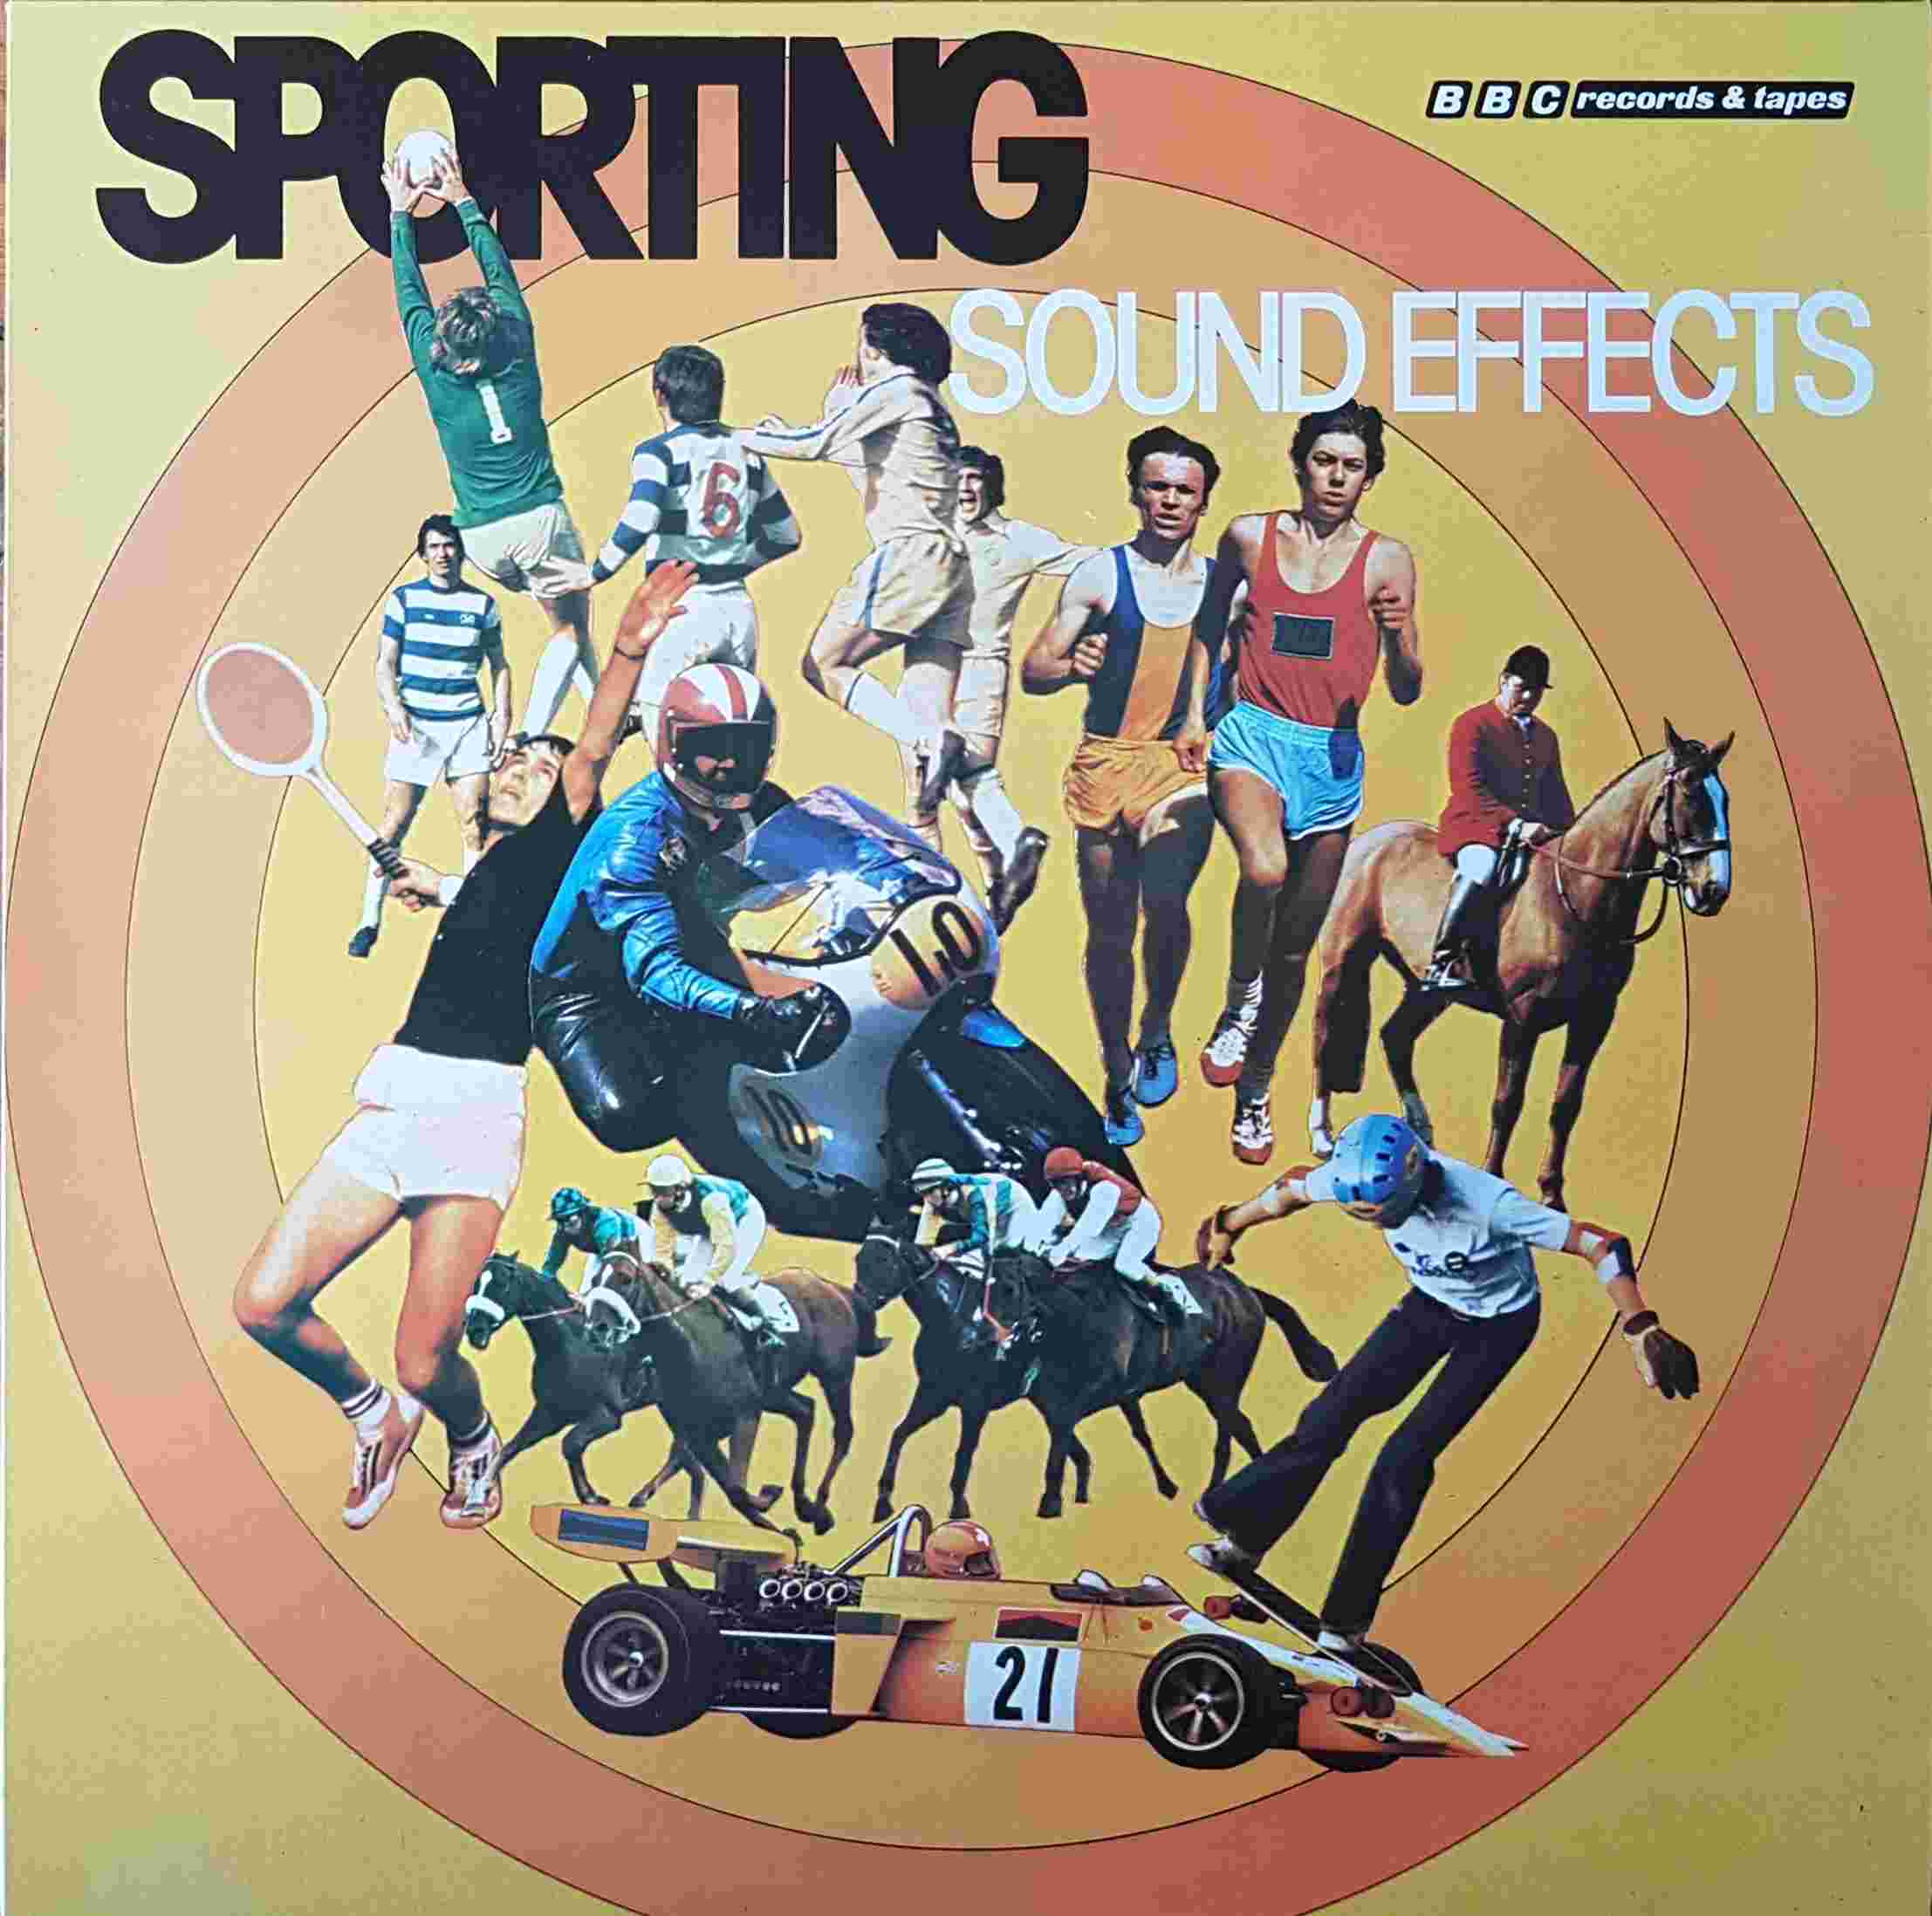 Picture of REC 322 Sporting sound effects by artist Various from the BBC albums - Records and Tapes library